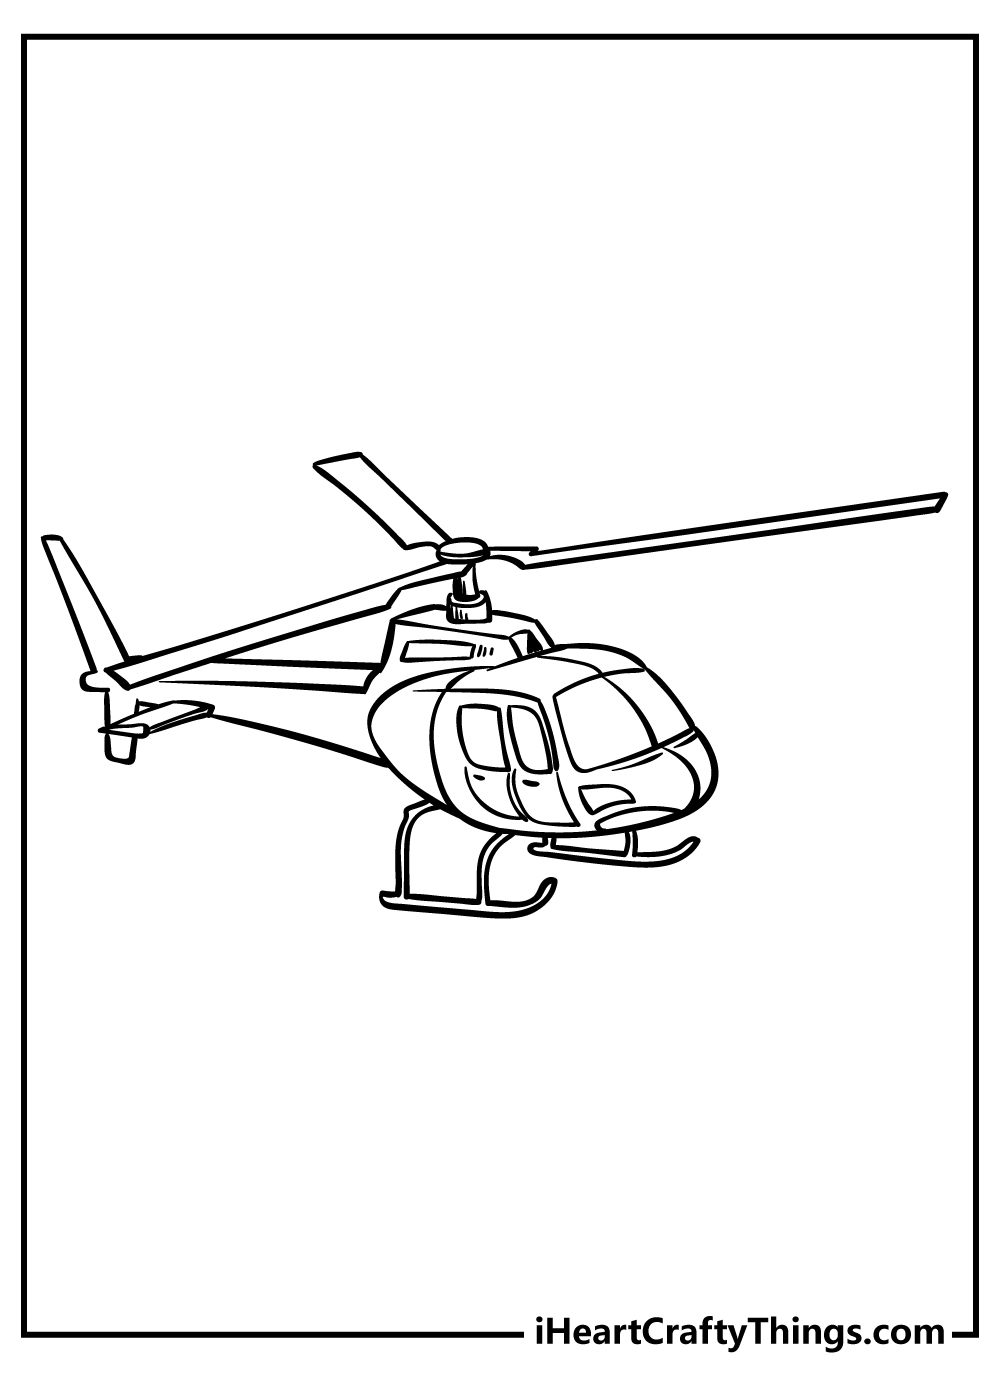 Helicopter Coloring Sheet for children free download